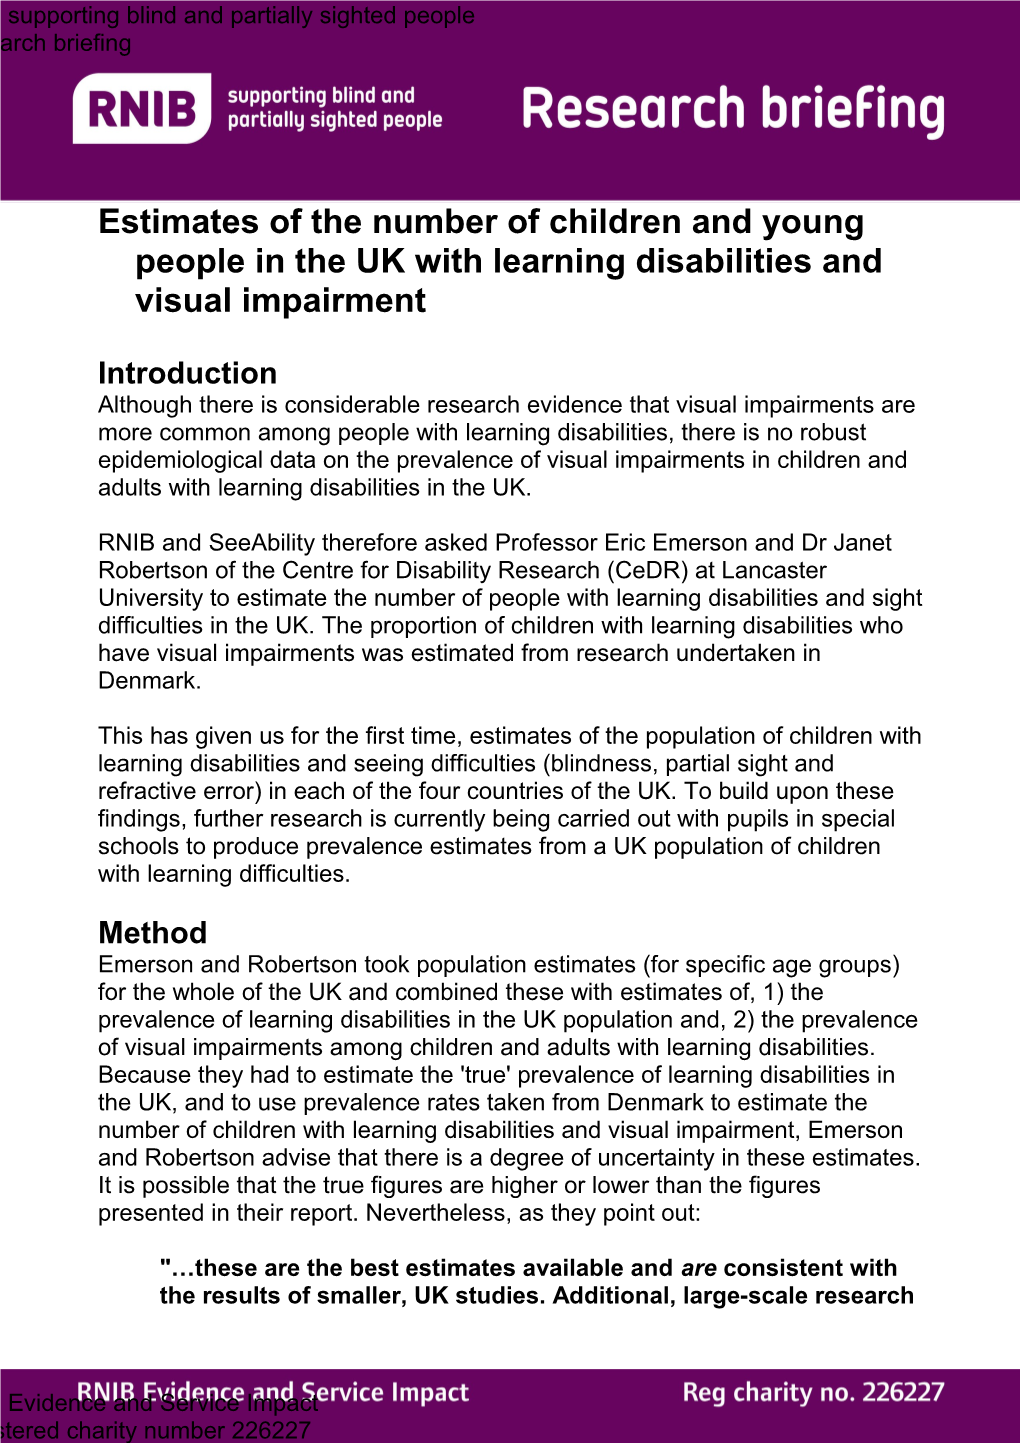 Estimates of Children and Young People with Learning Disability and Sight Loss in UK